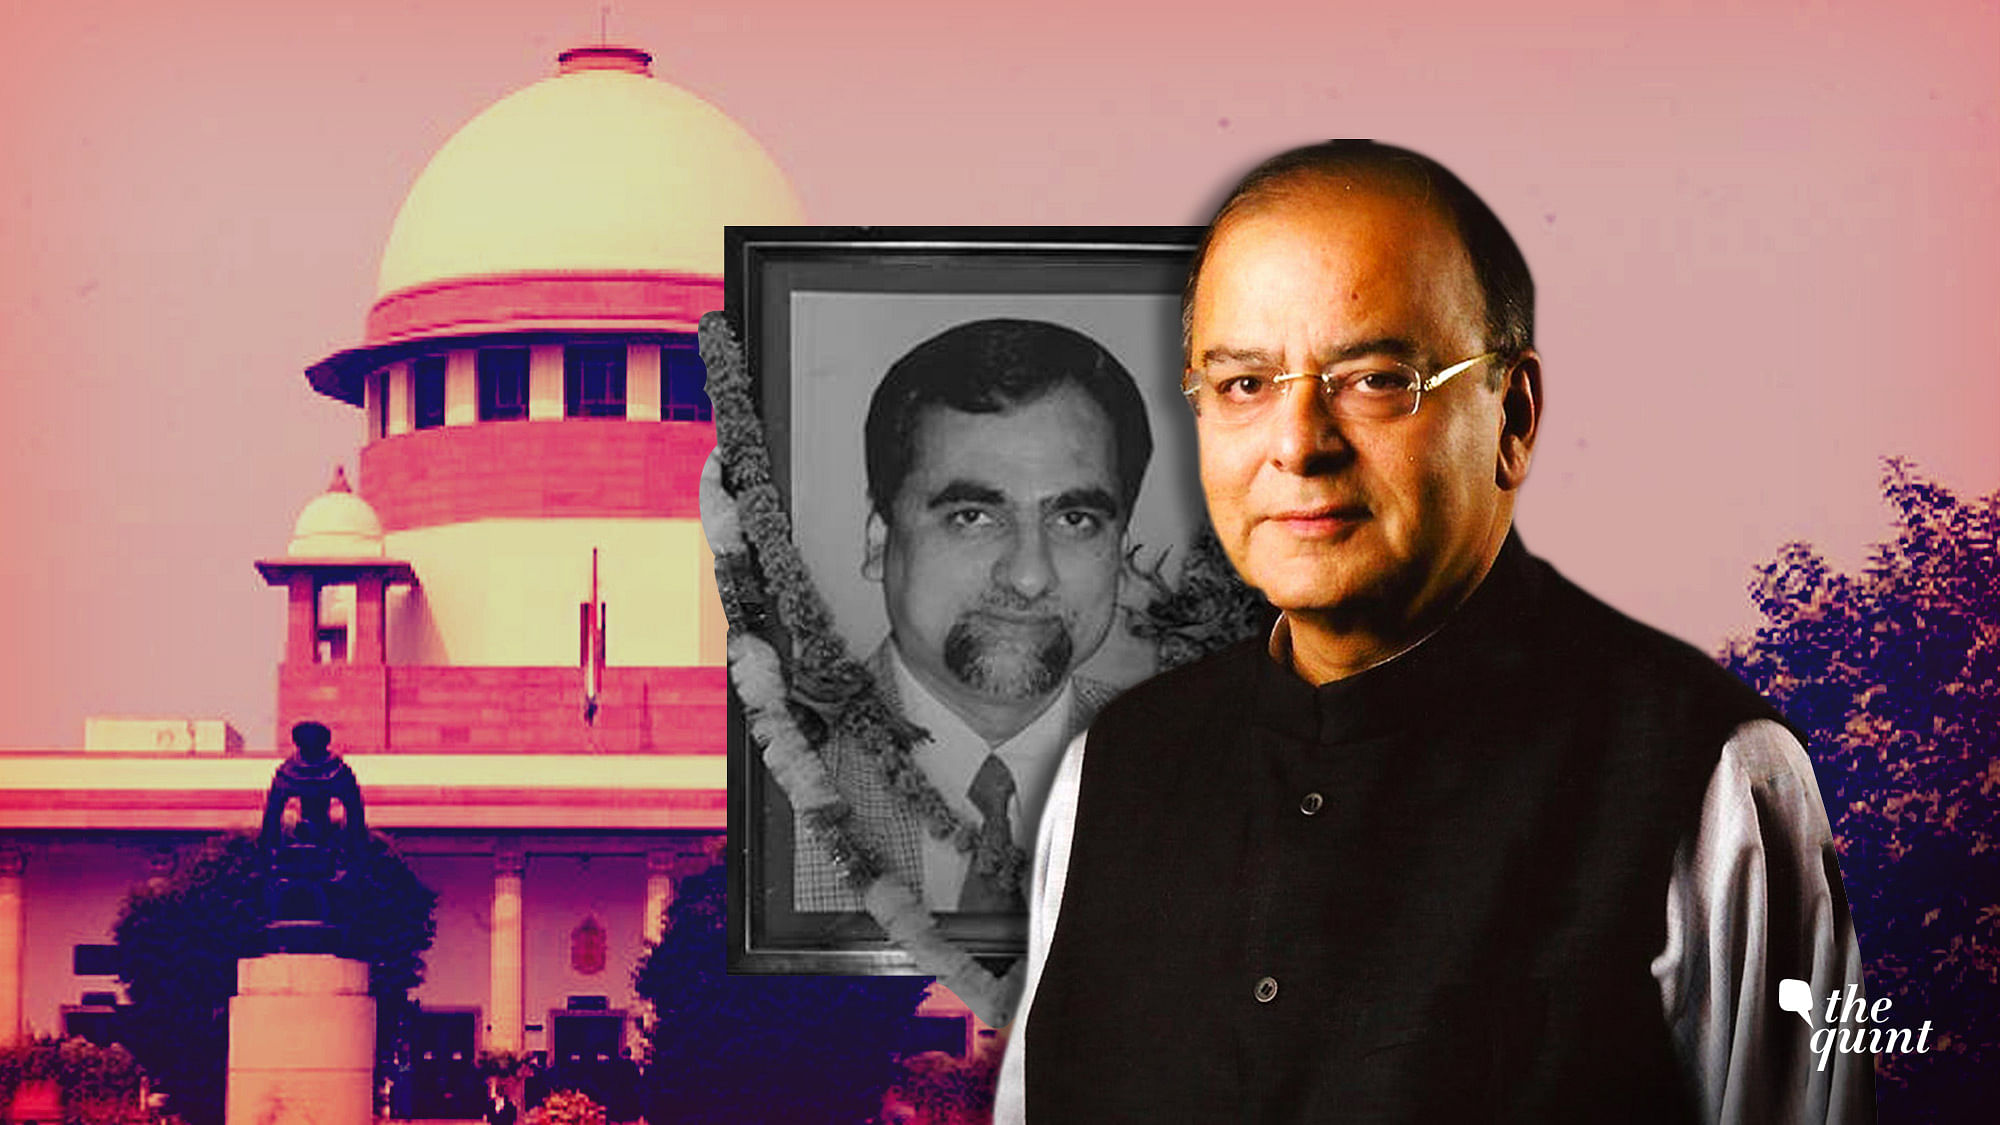 Finance Minister Arun Jaitley has responded to the Supreme Court’s decision on Judge Loya, and the impeachment crisis